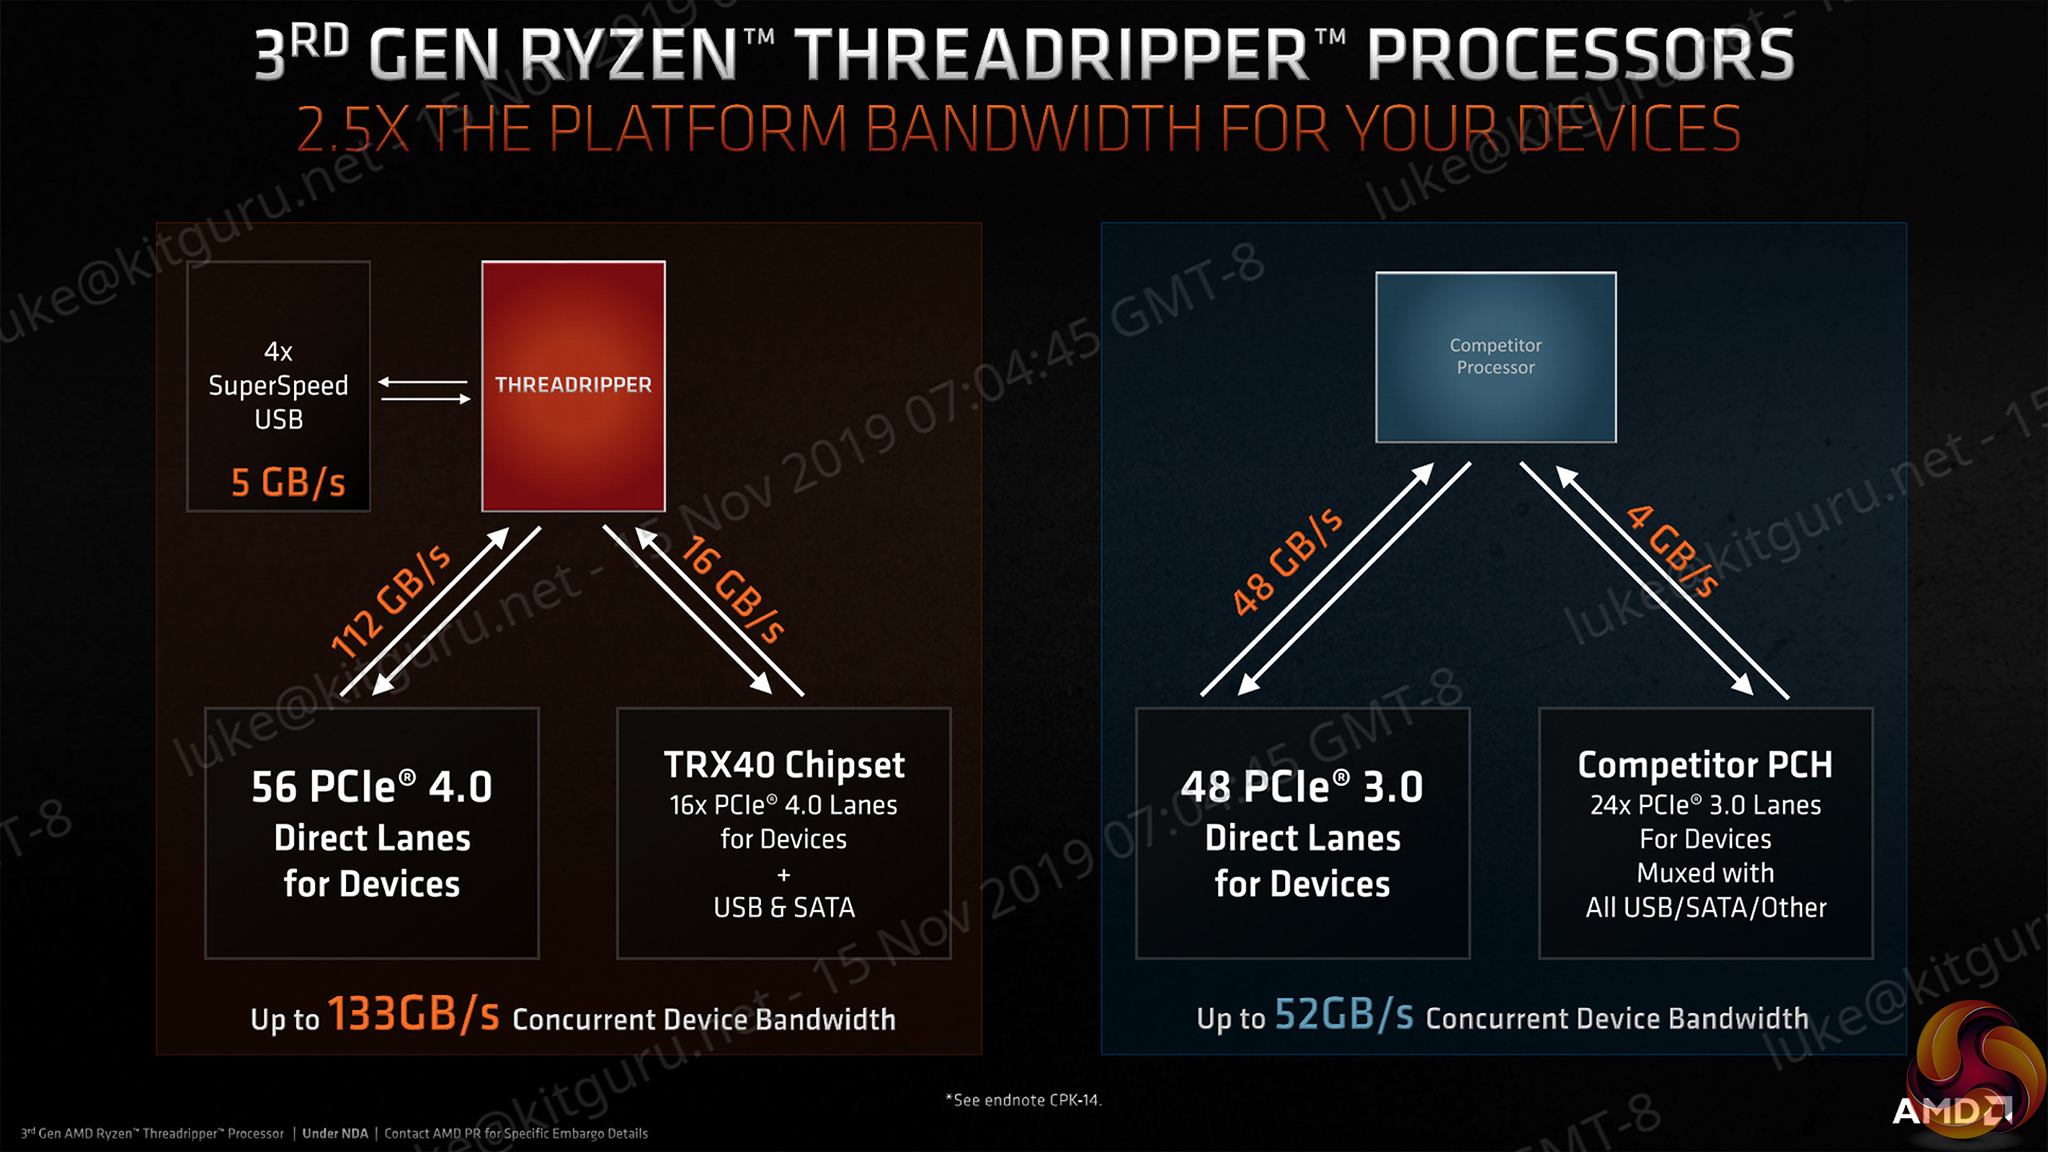 Why Ryzen Threadripper has two extra chips